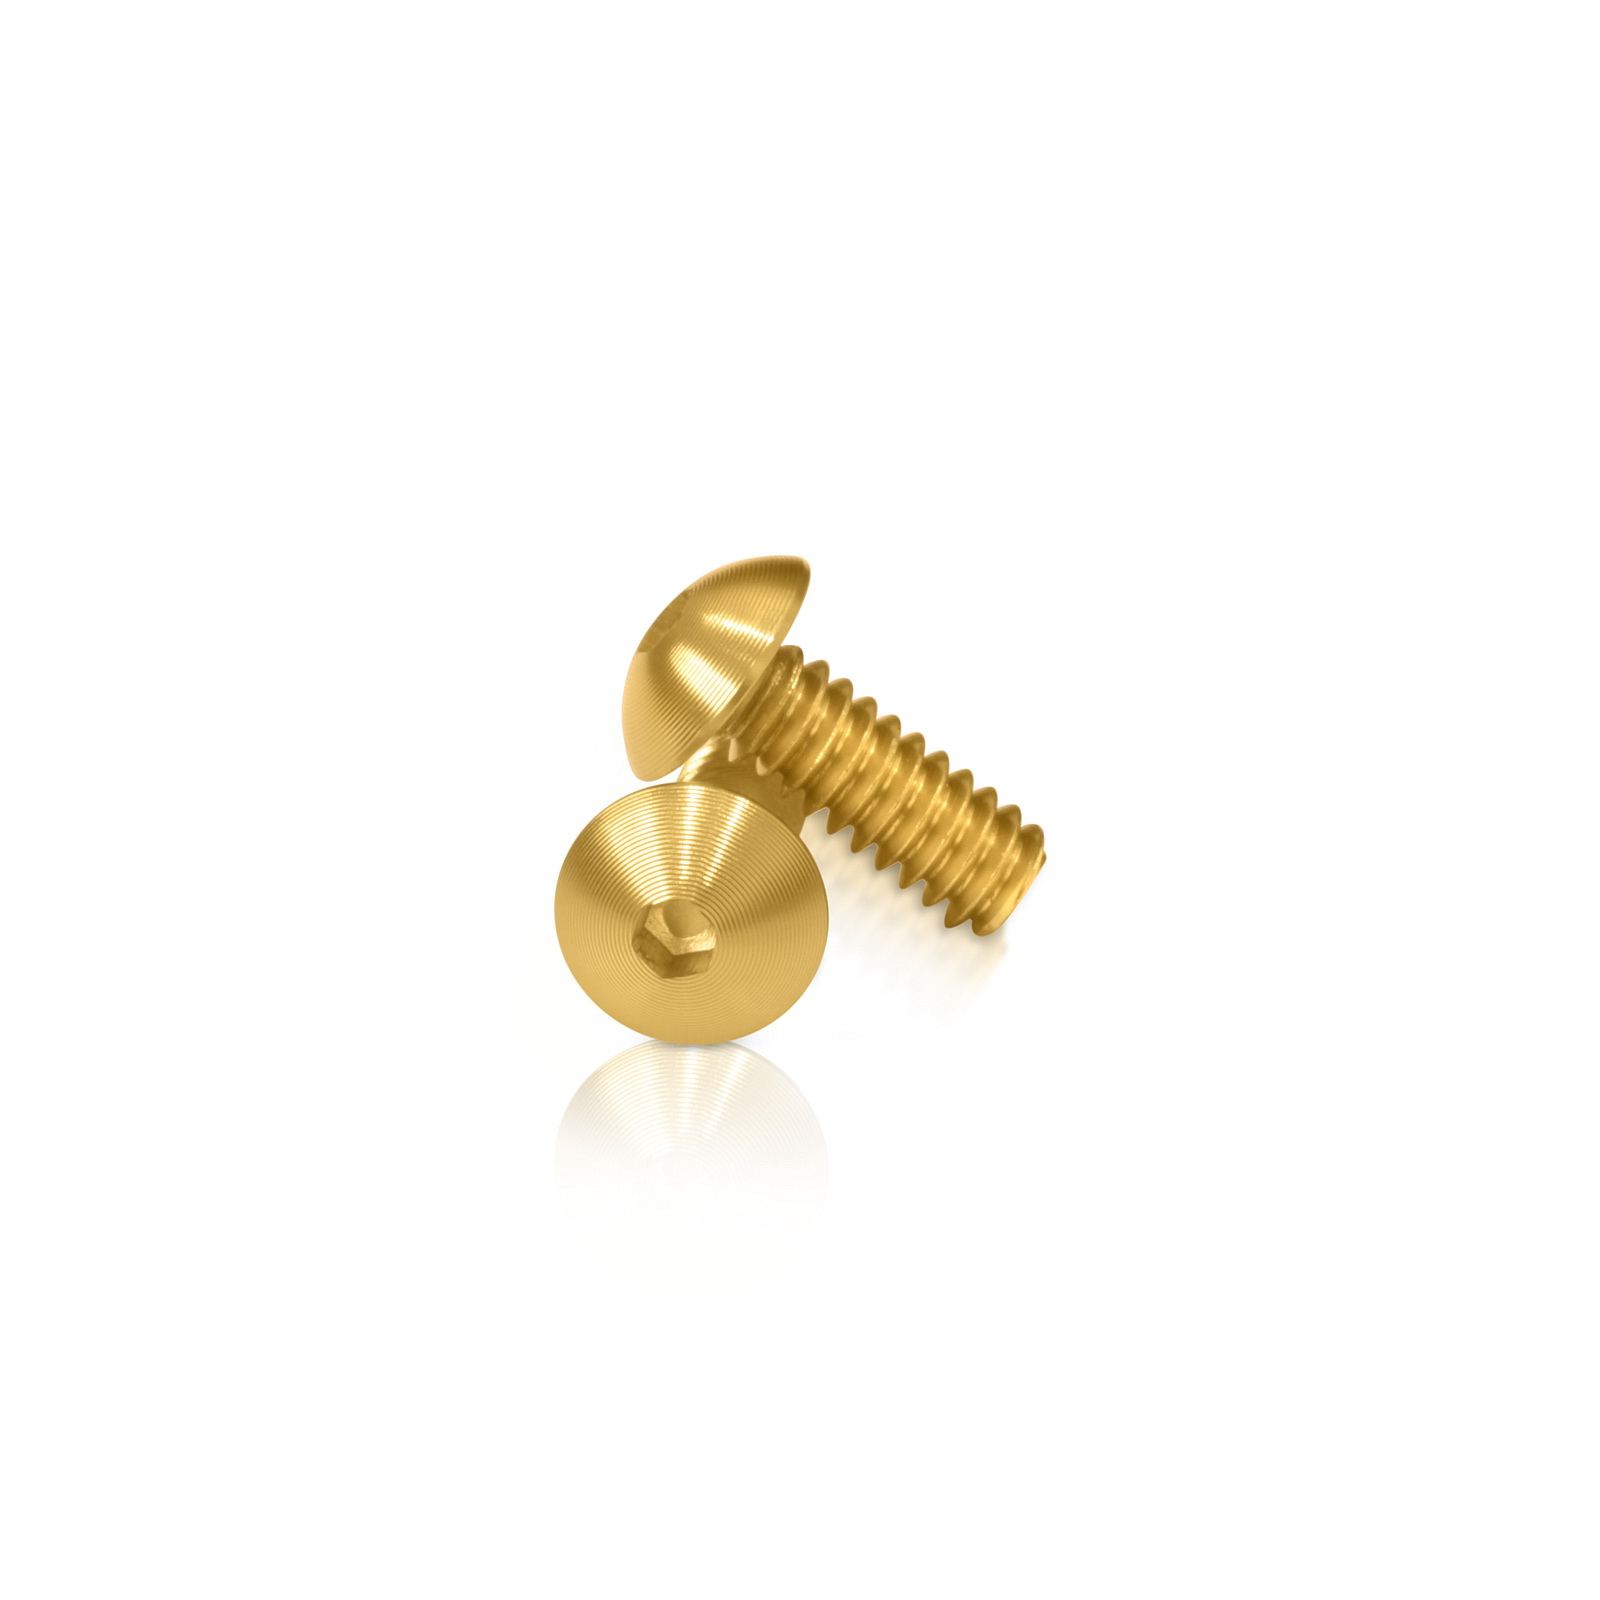 Low Profile Gold Anodized Aluminum Bolt 10-24 Thread, Length 1/2'', 3/32'' Hex Broach